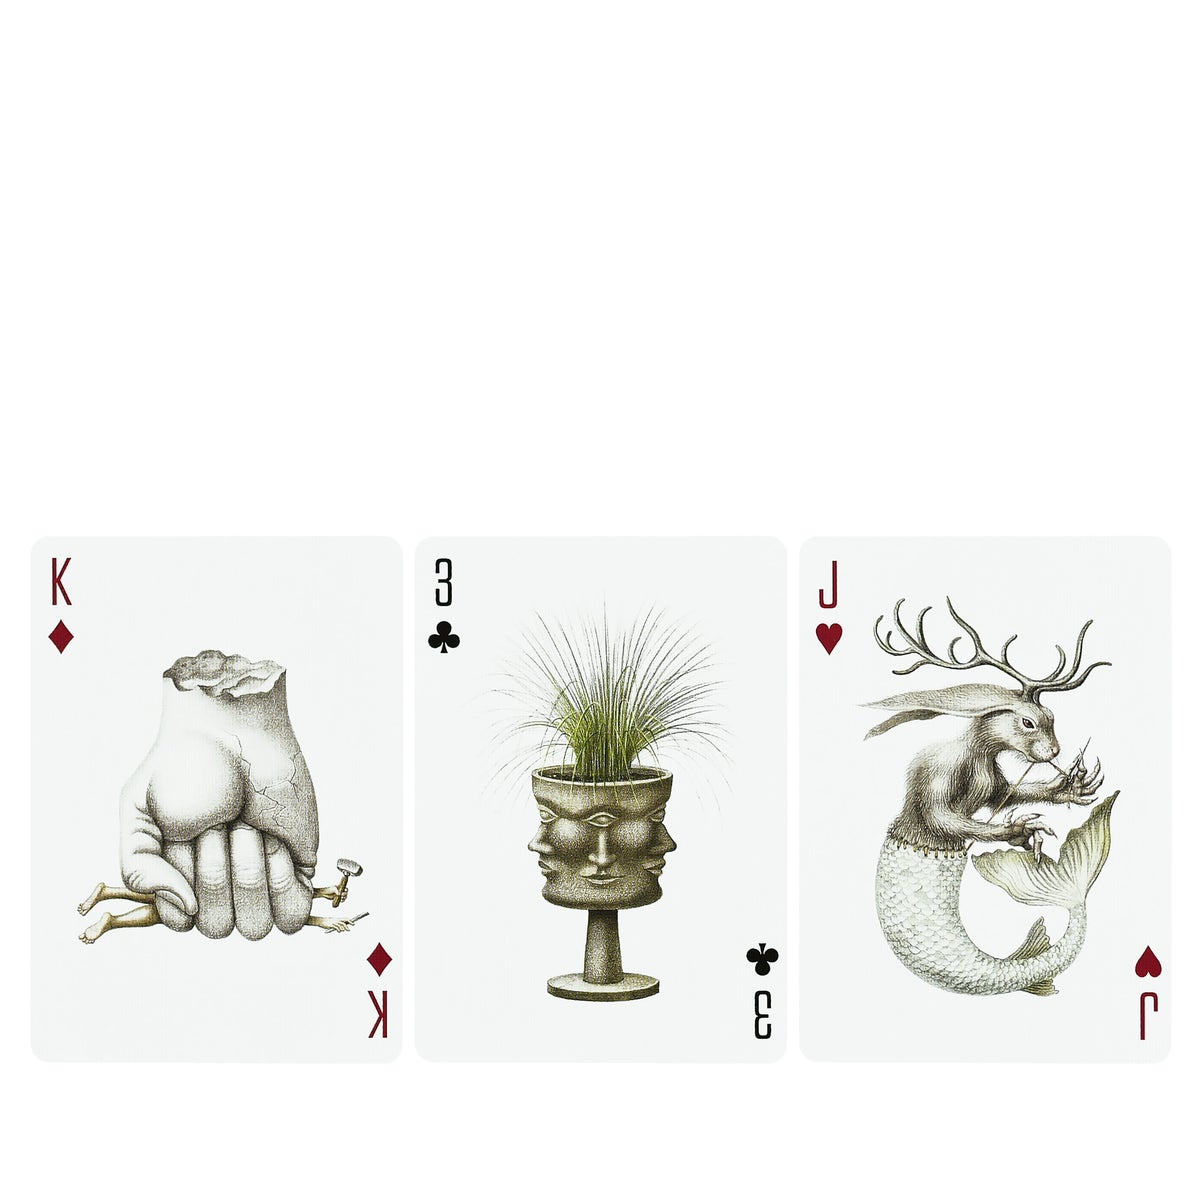 ART OF PLAY - PLAYING CARDS - CABINETARIUM DECK